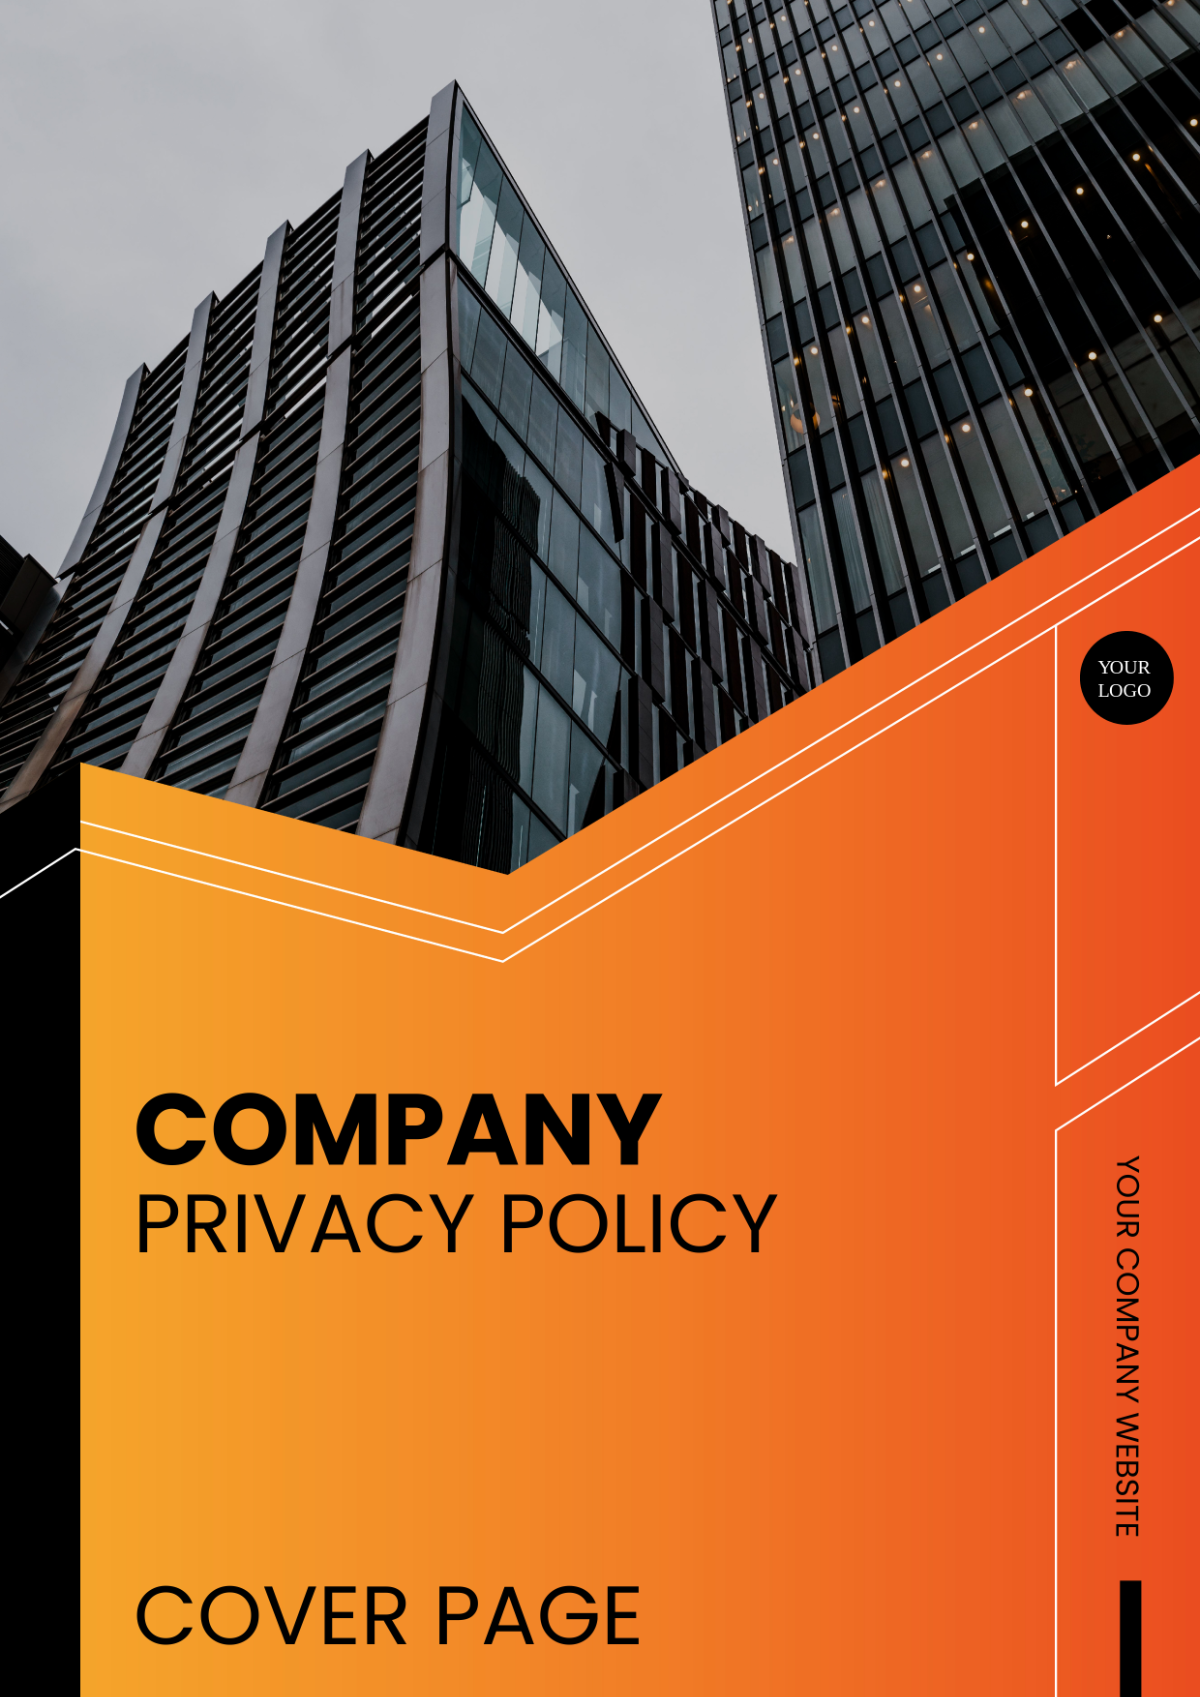 Company Privacy Policy Cover Page